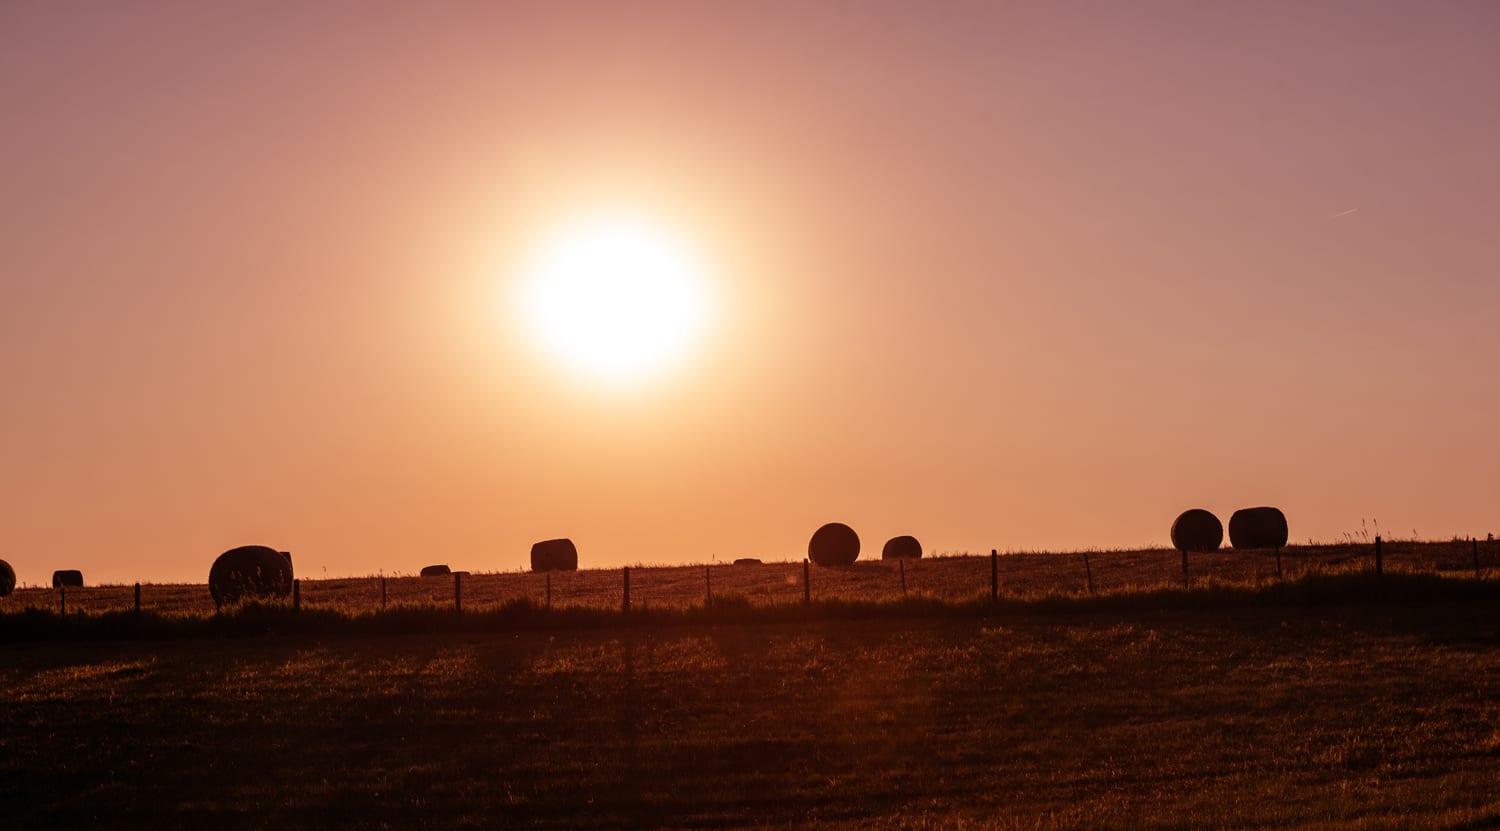 Kamloops rural life fields with animal and hay with pink sky with sun